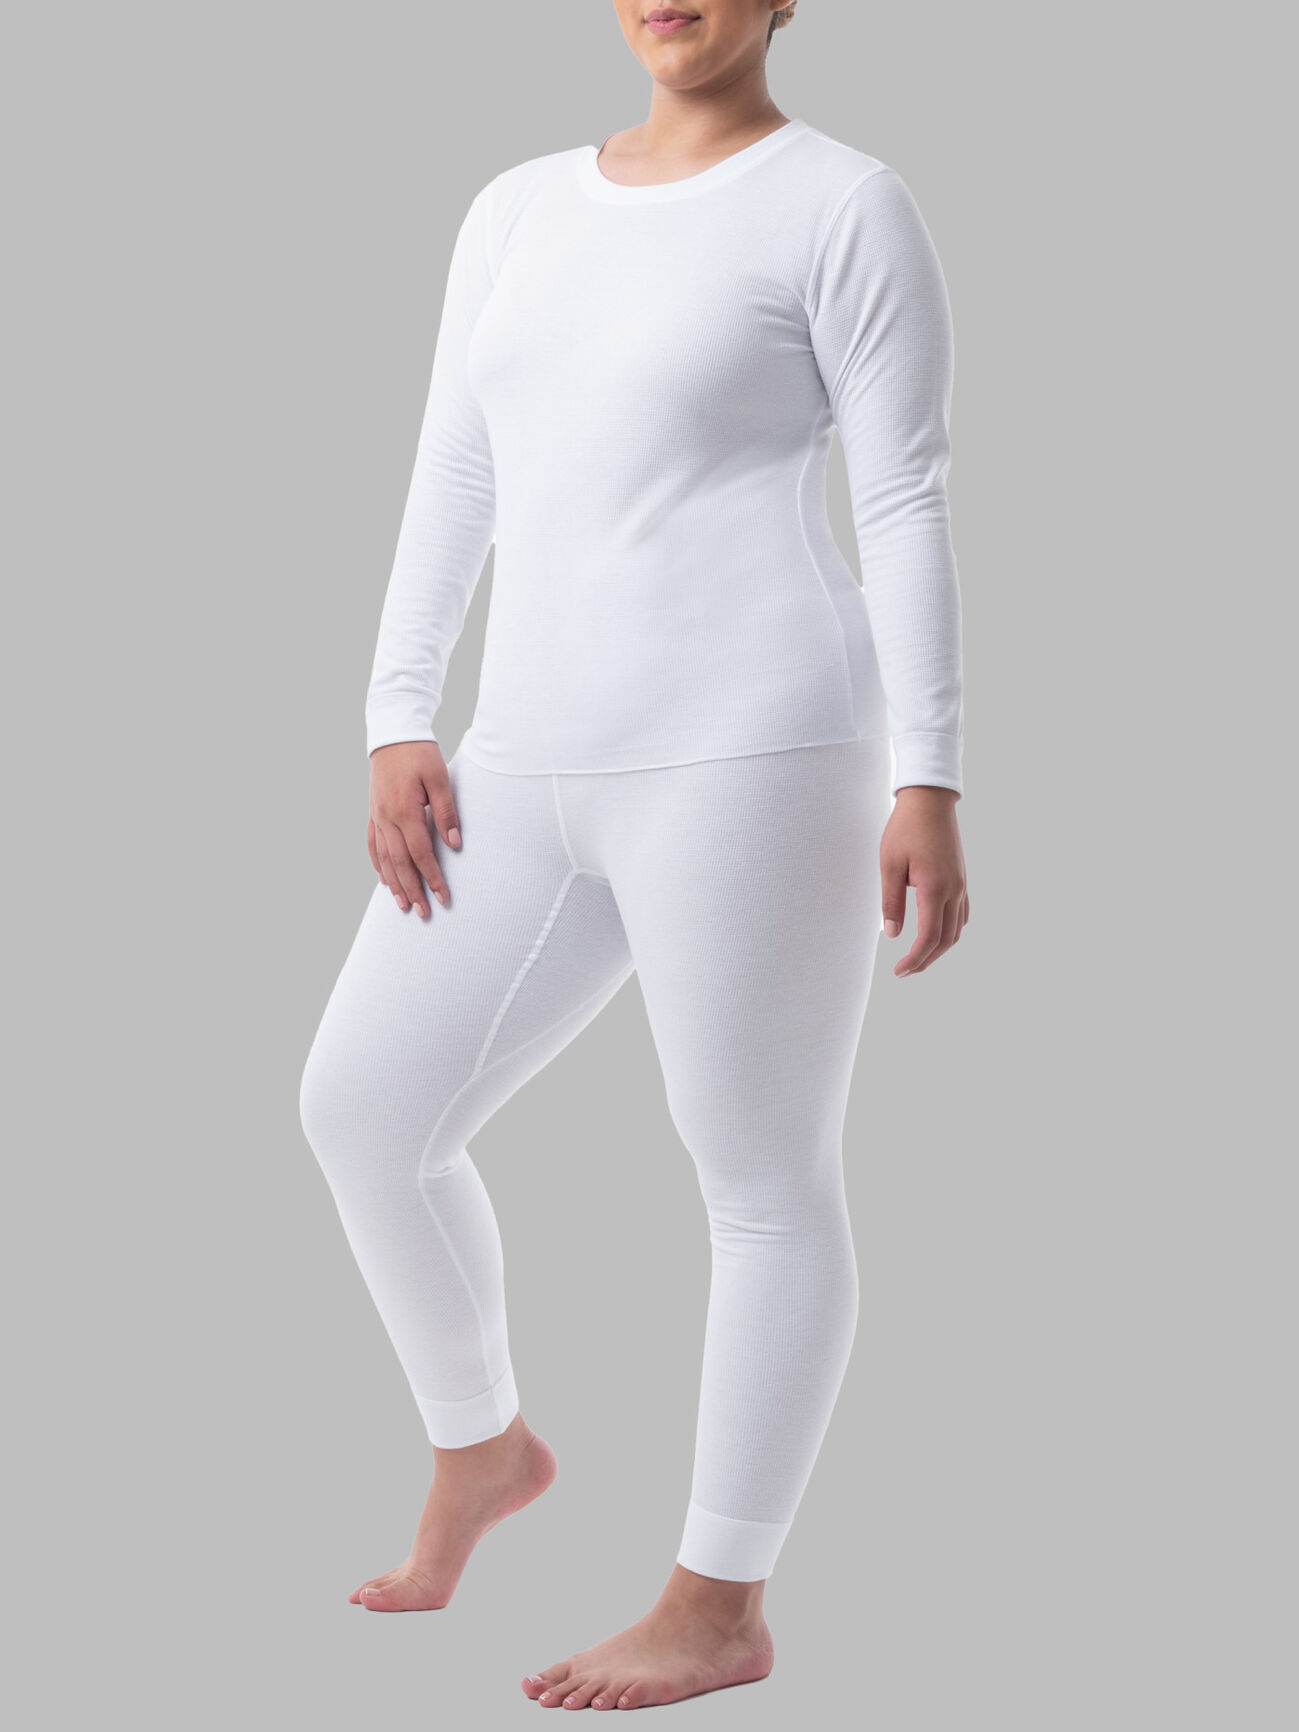 LLTT Thermal Underwear Women's Thermal Underwear Suit Seamless Breathable Warm  Thermal Clothing Elasticity (Colour: Grey, Size: One Size) : :  Fashion